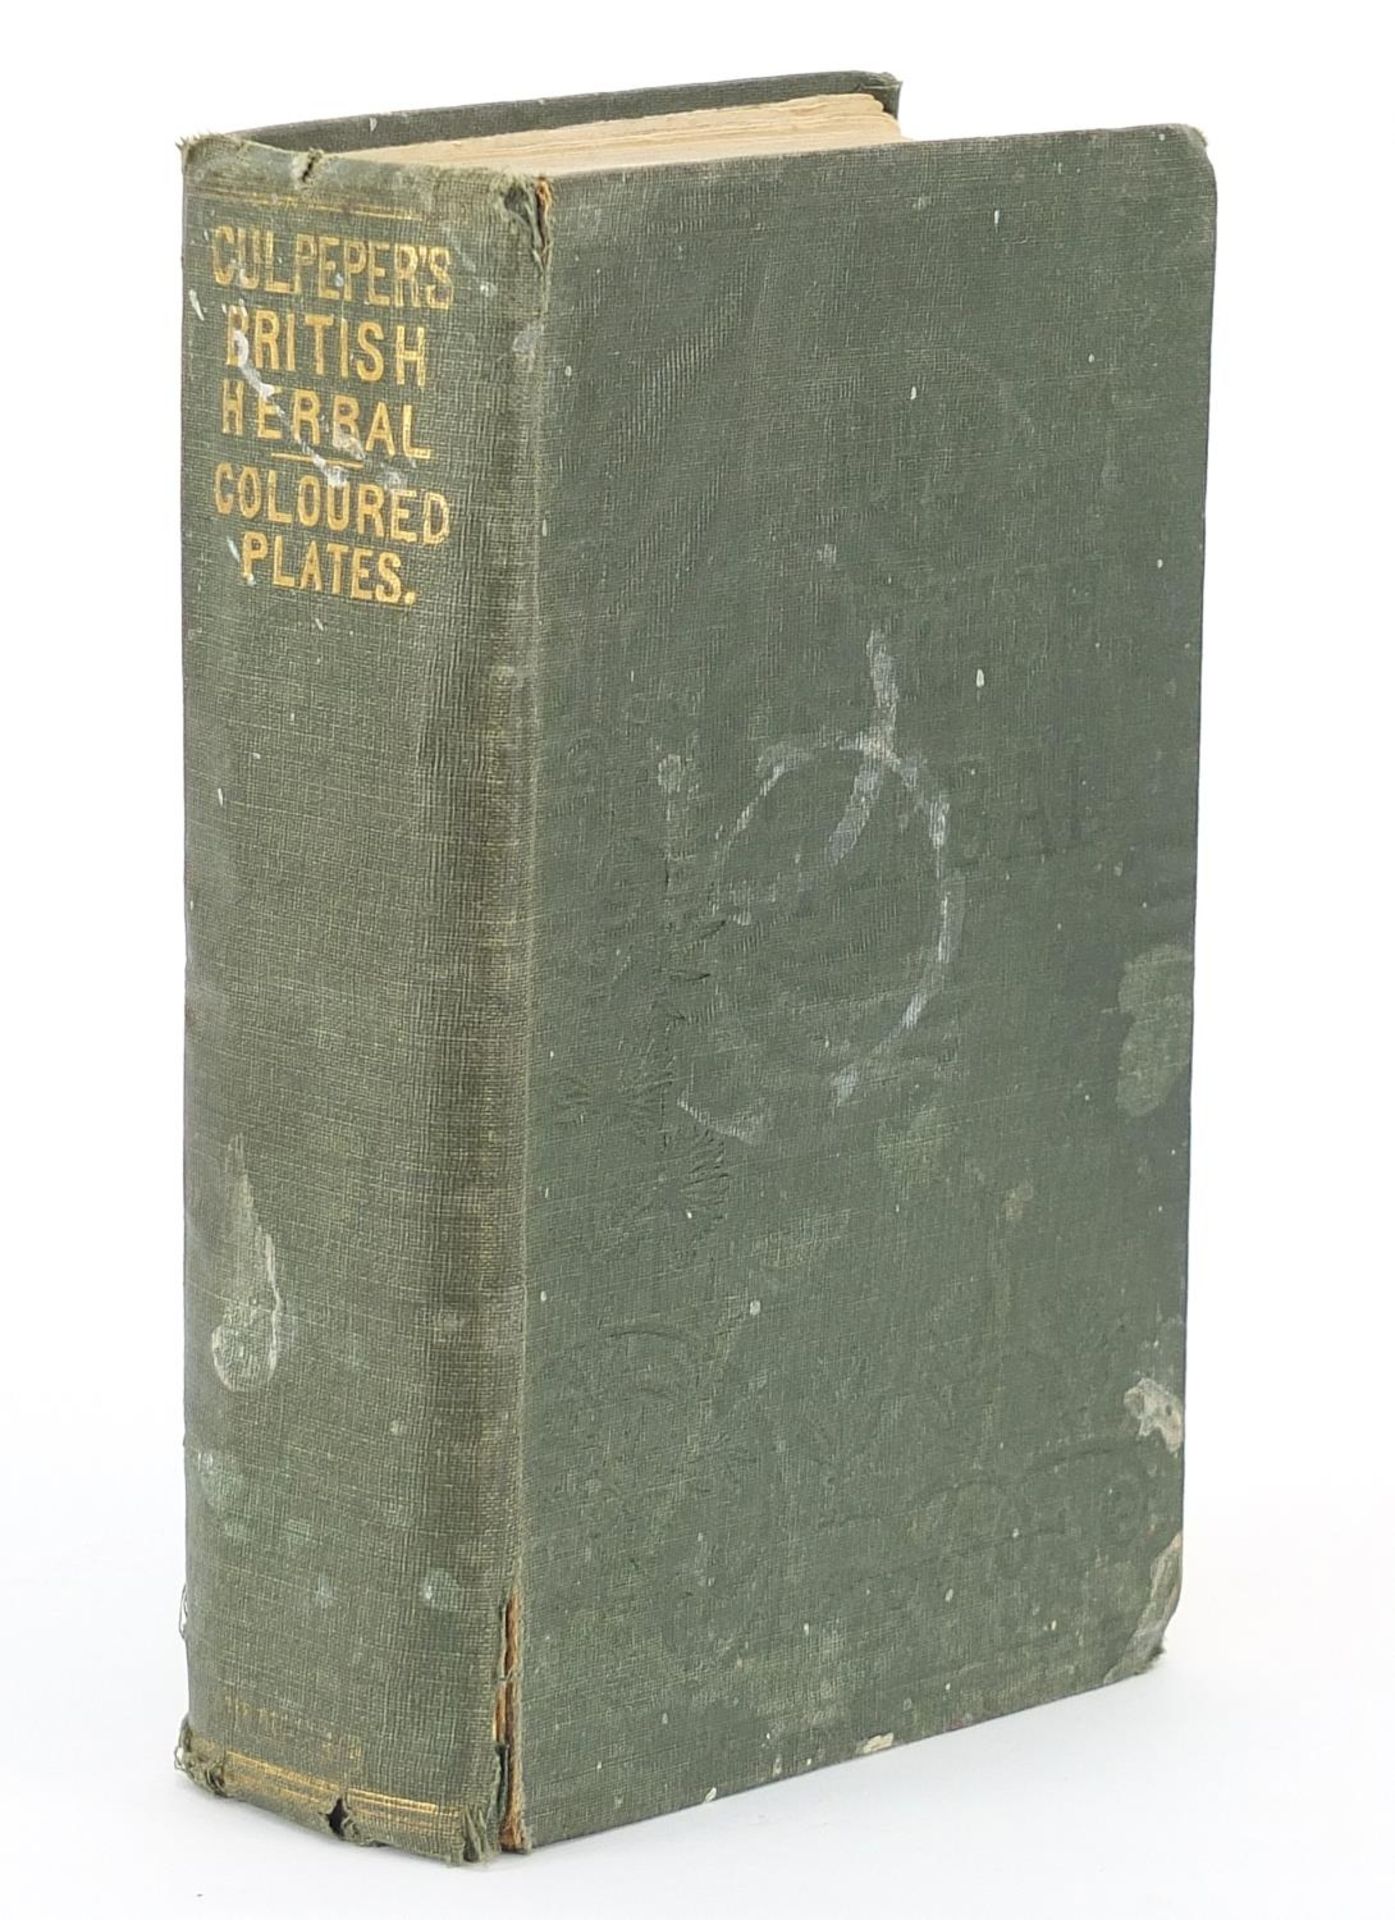 Culpeper's British Herbal, hardback book published by Milner & Co with coloured plates